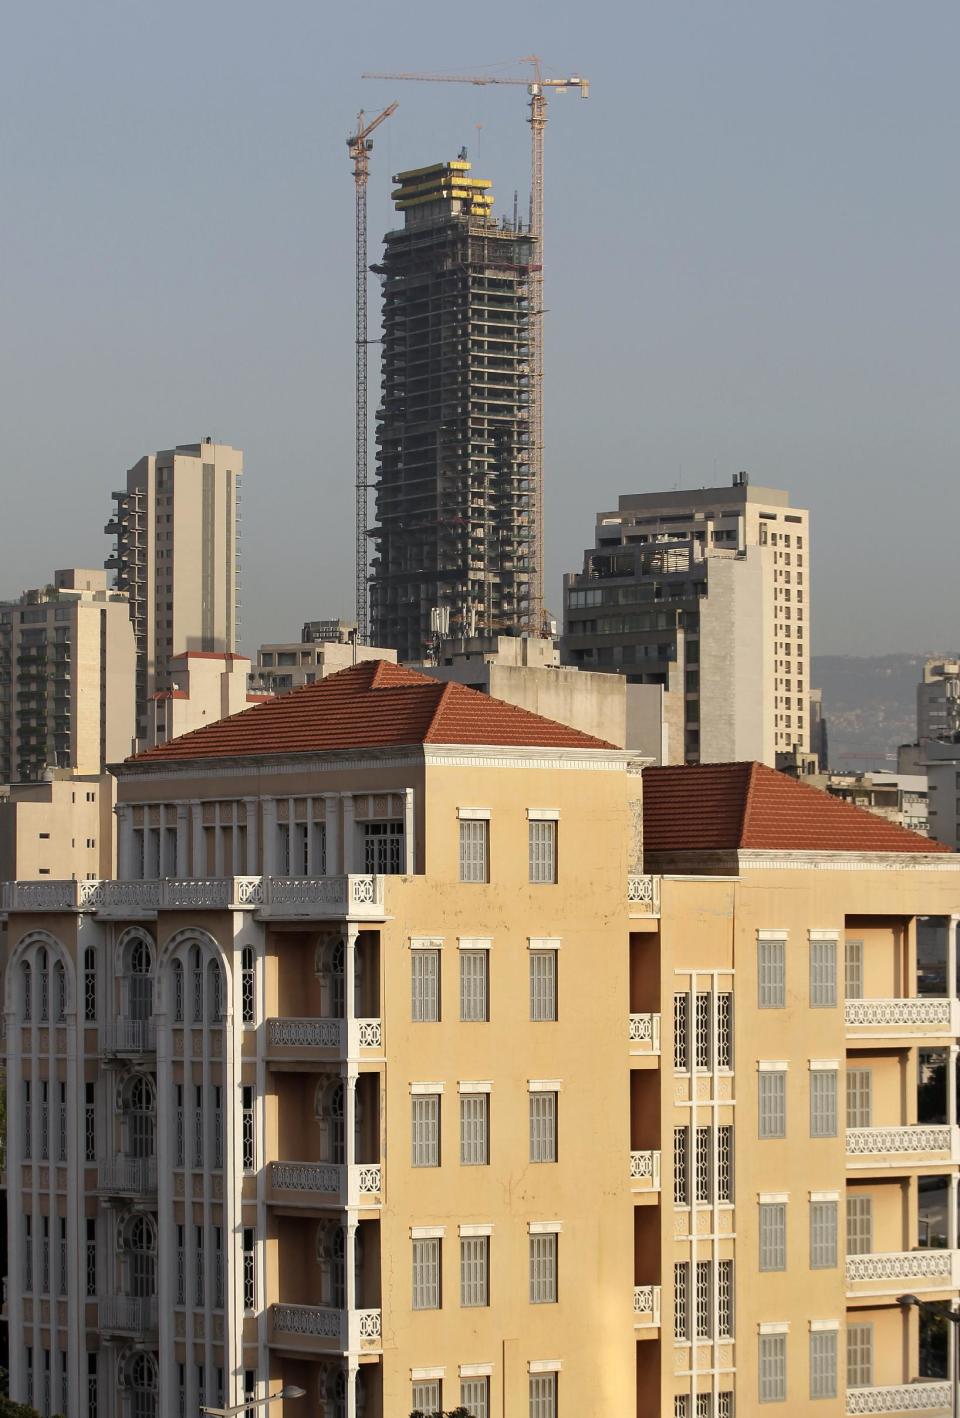 In this April 8, 2014 photo, an old building with a traditional red brick roof, foreground, is overshadowed by the Beirut Sky tower under construction in Beirut, Lebanon. One by one, the old traditional houses of Beirut are vanishing as luxury towers sprout up on every corner, altering the city's skyline almost beyond recognition. While Lebanon's real estate sector has developed to become one of the country's success stories, many say it is coming at the expense of Lebanon's identity and heritage. (AP Photo/Hussein Malla)